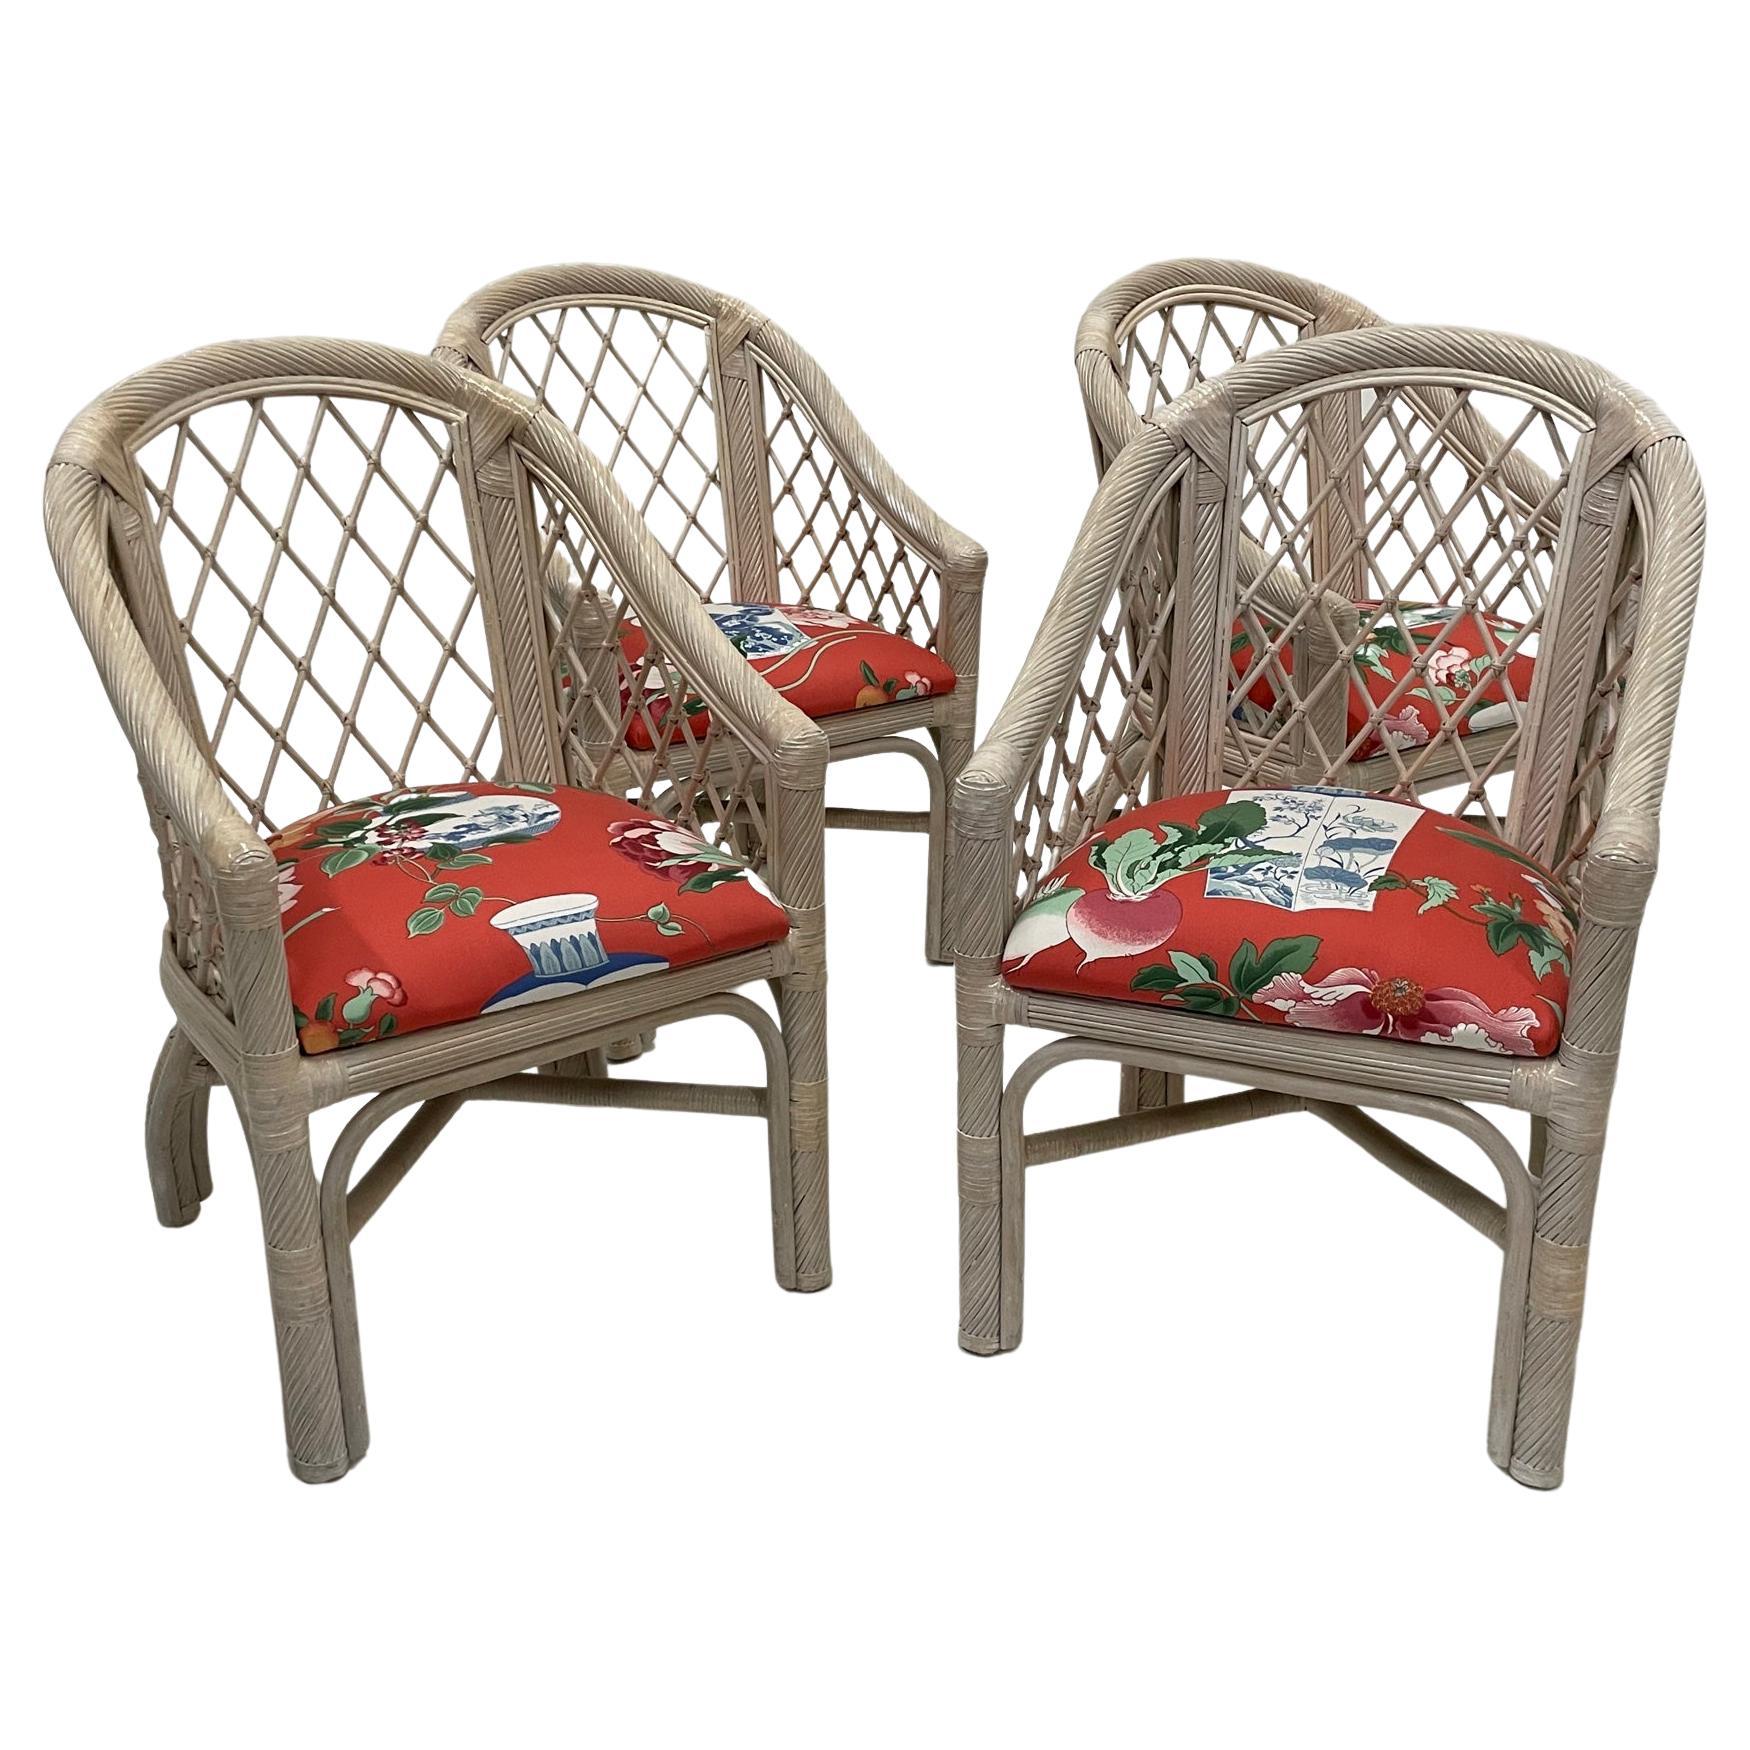 Classic Set of 4 McGuire Whitewashed Handcrafted Barrel Back Rattan Armchairs